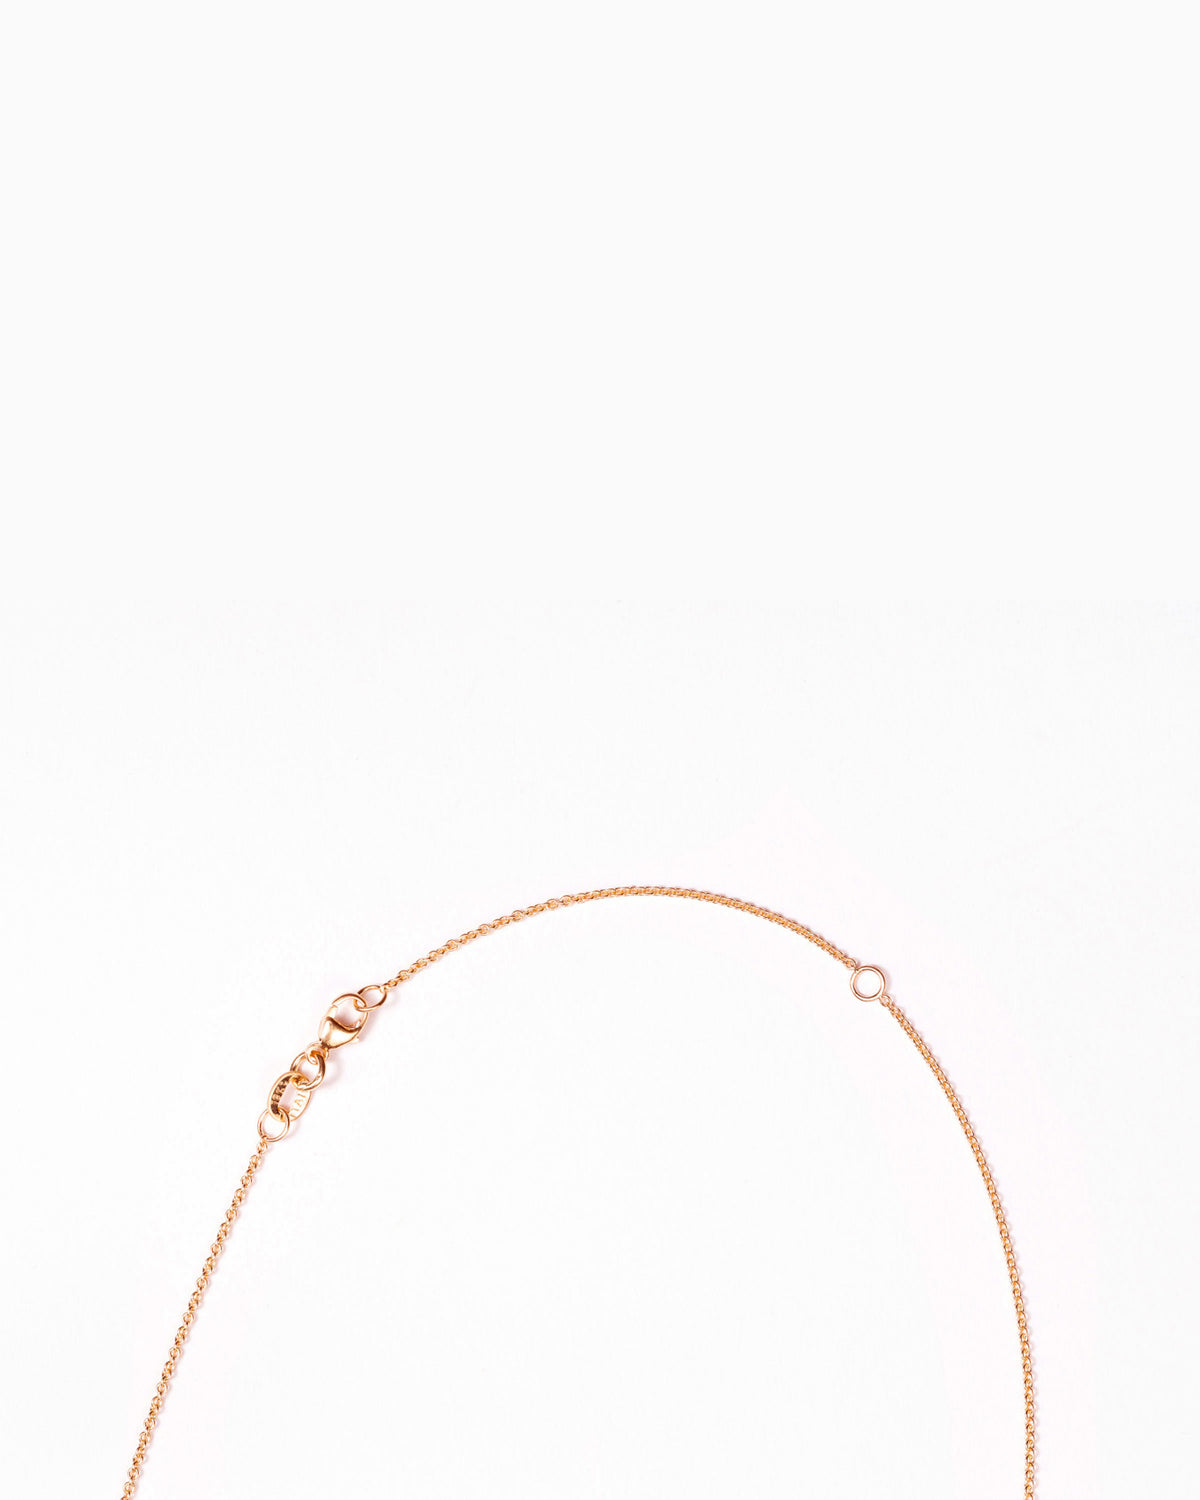 Rose Gold LOVE Necklace